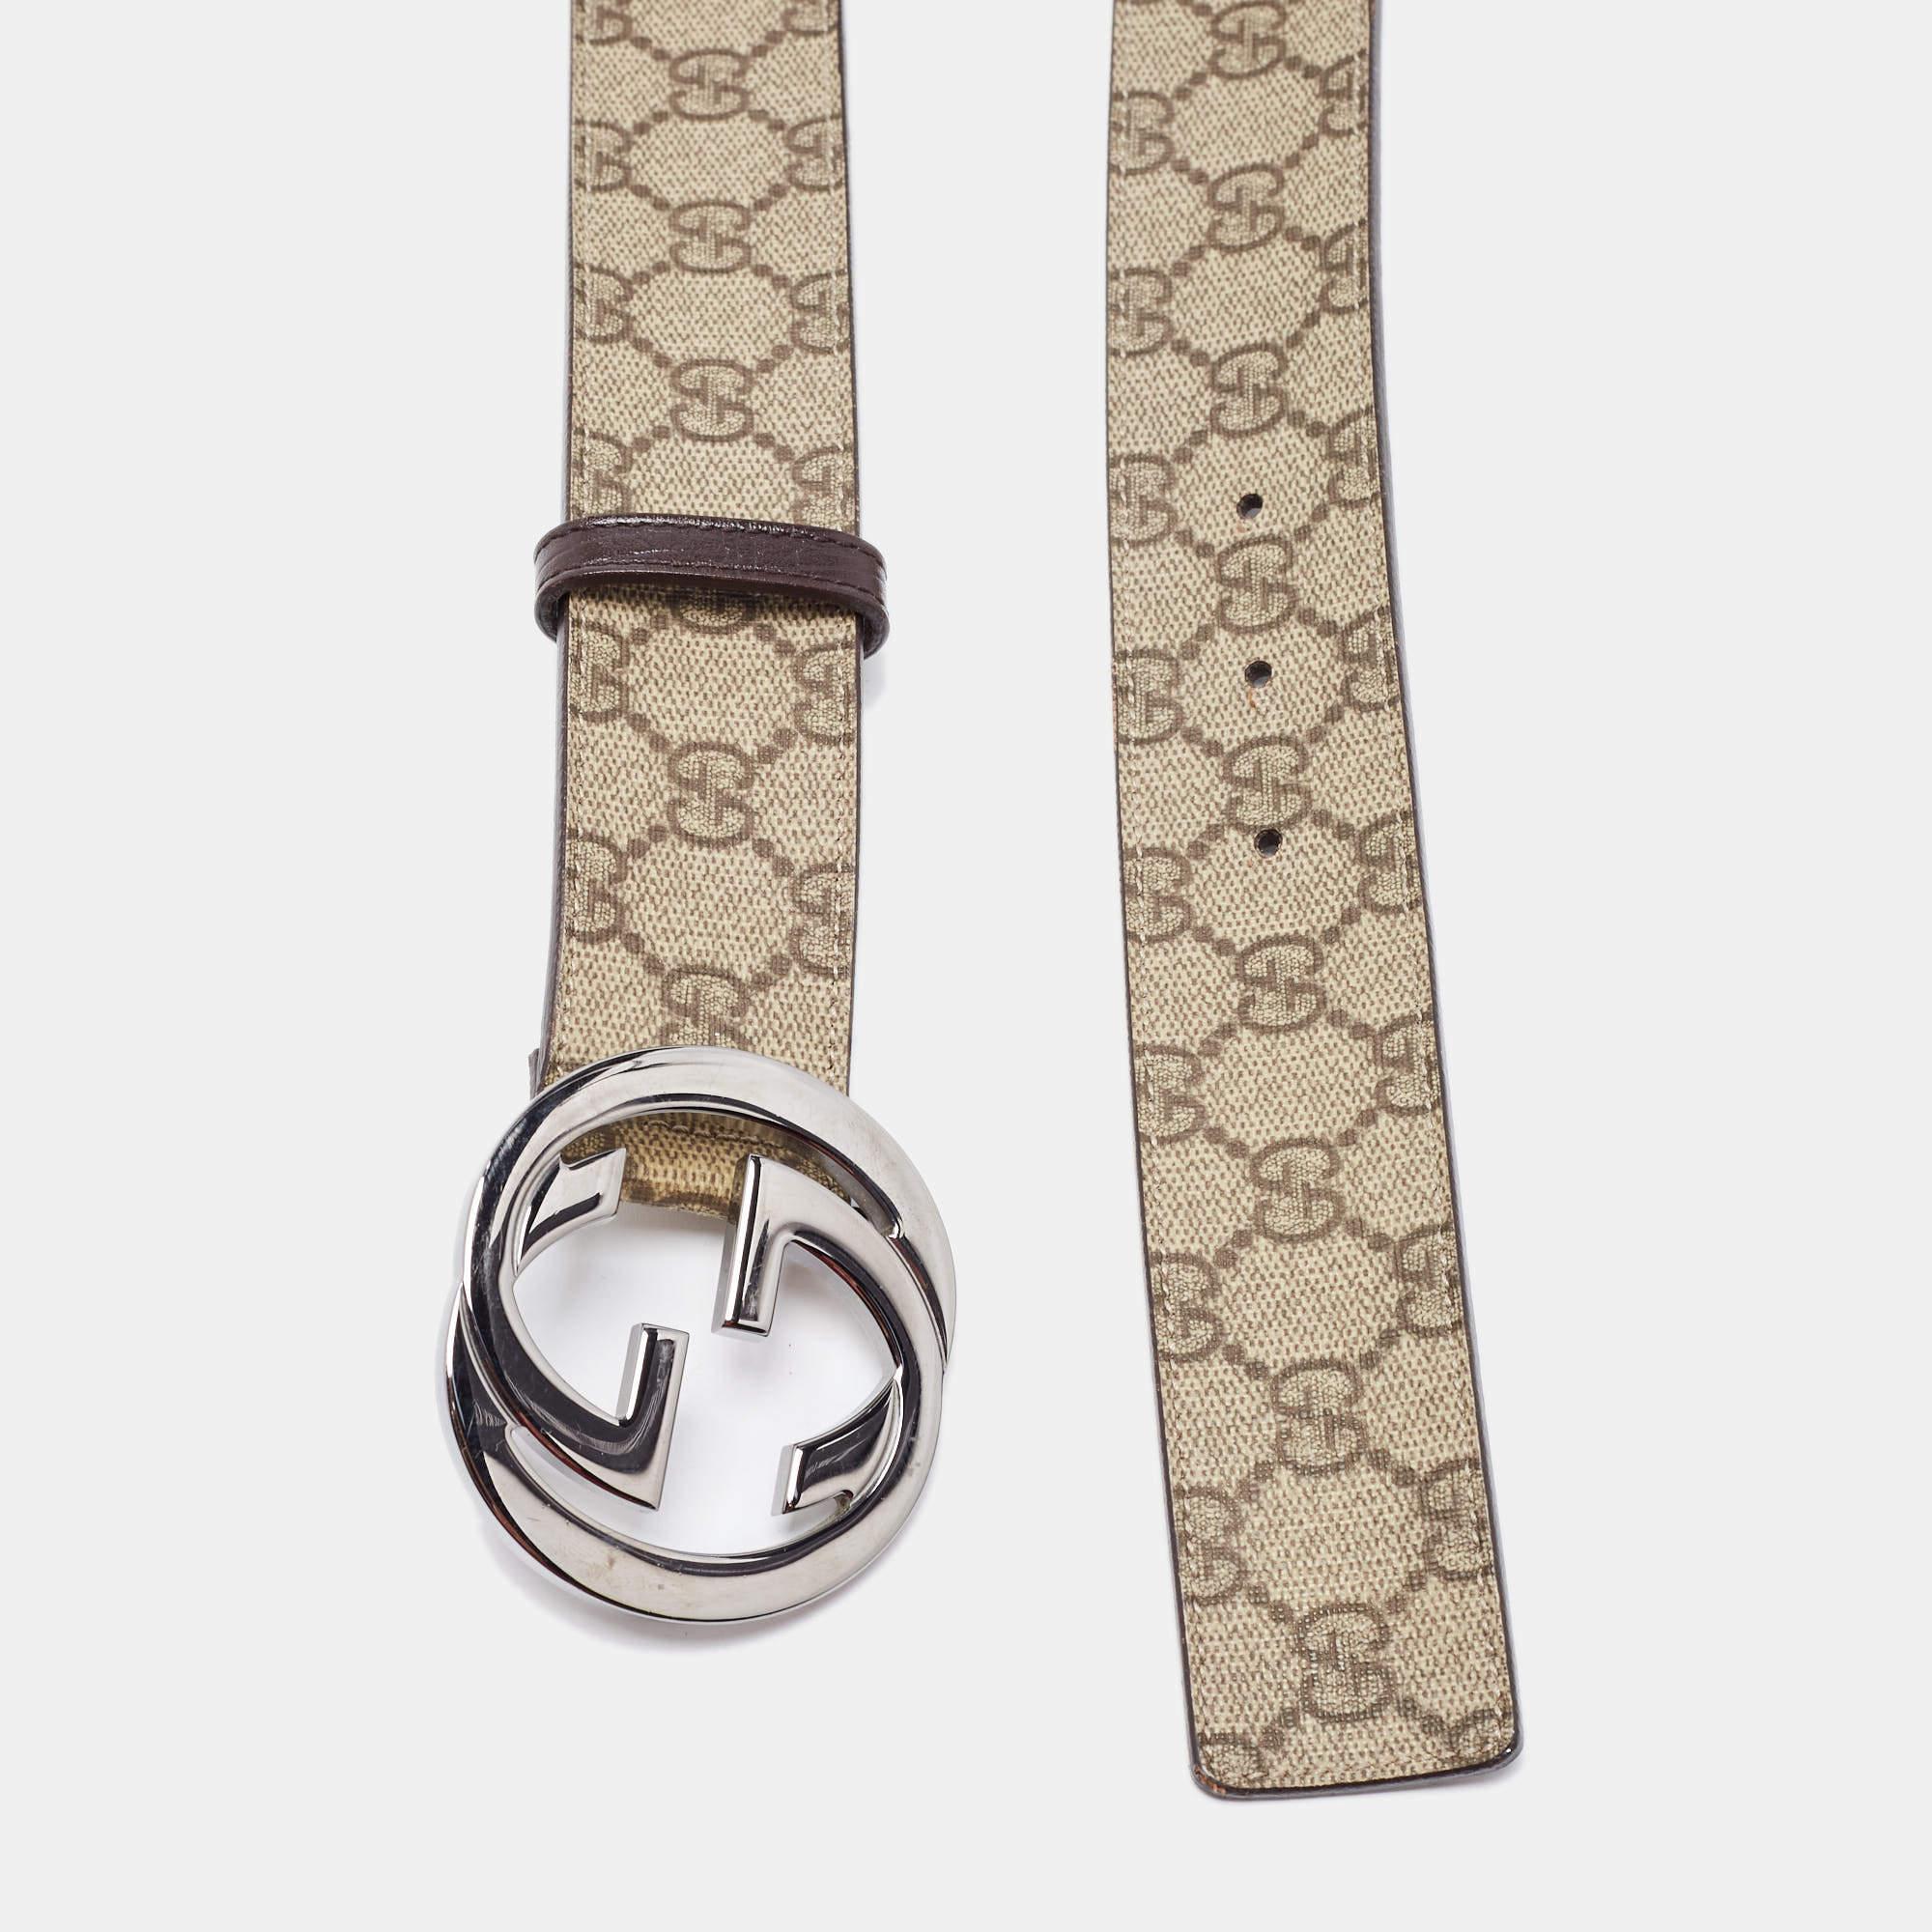 Presenting a Gucci belt that has been crafted to be durable and to suit all your refined looks. High in durability and appeal, this belt is a fine element of luxury.

